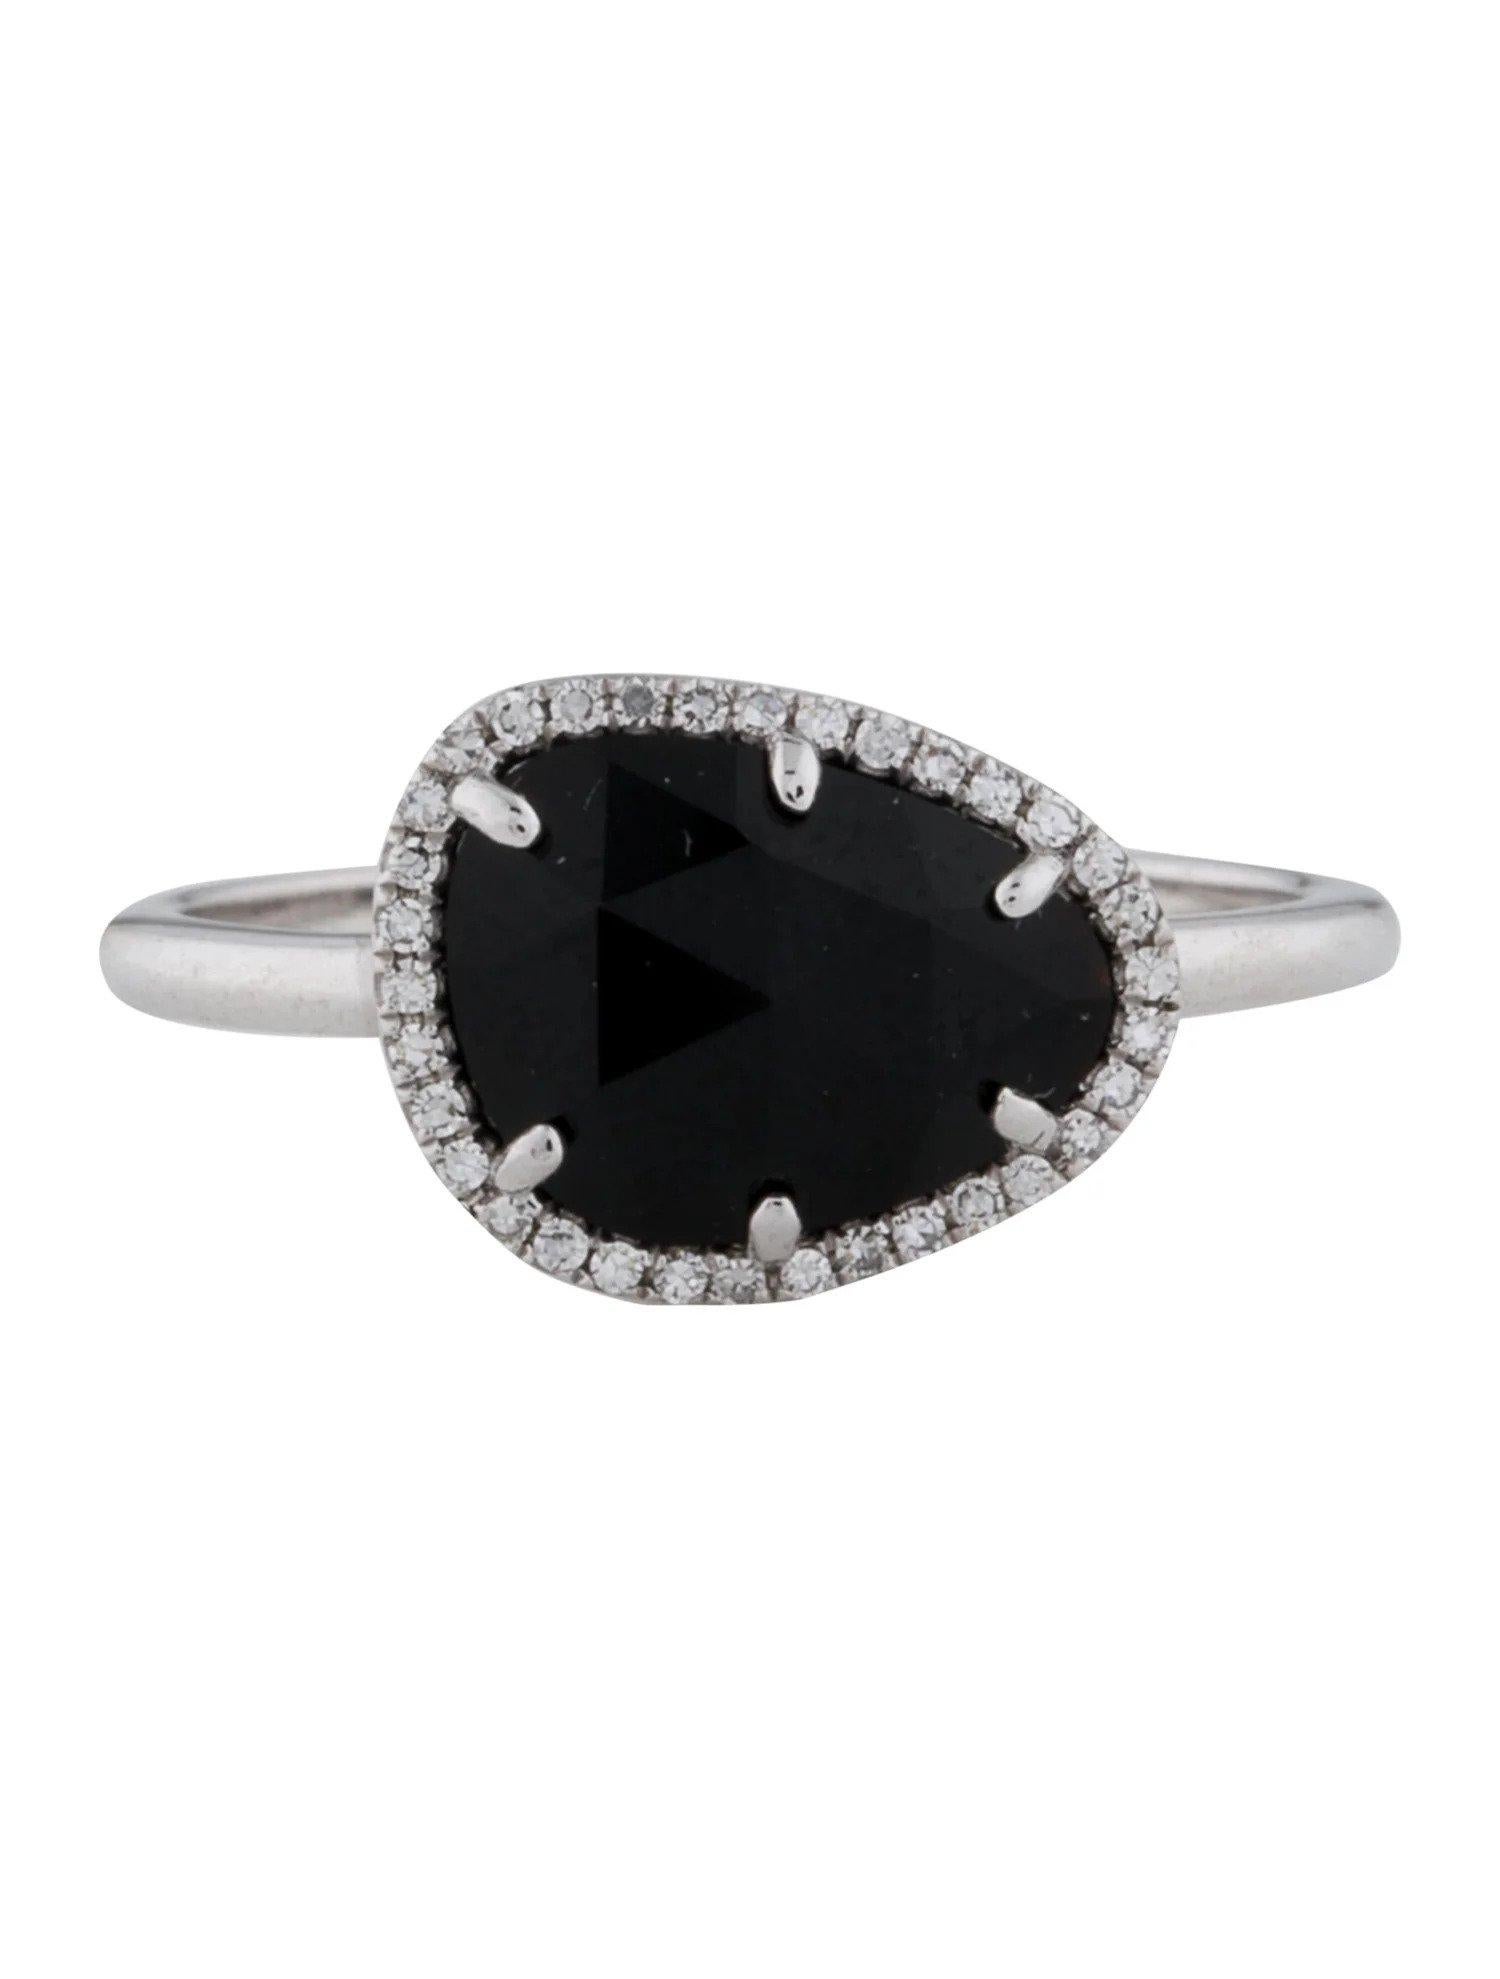 This Onyx & Diamond Ring is a stunning and timeless accessory that can add a touch of glamour and sophistication to any outfit. 

This ring features a 1.56 Carat Onyx (12 x 9 MM), with a Diamond Halo comprised of 0.08 Carats of Single Cut Round